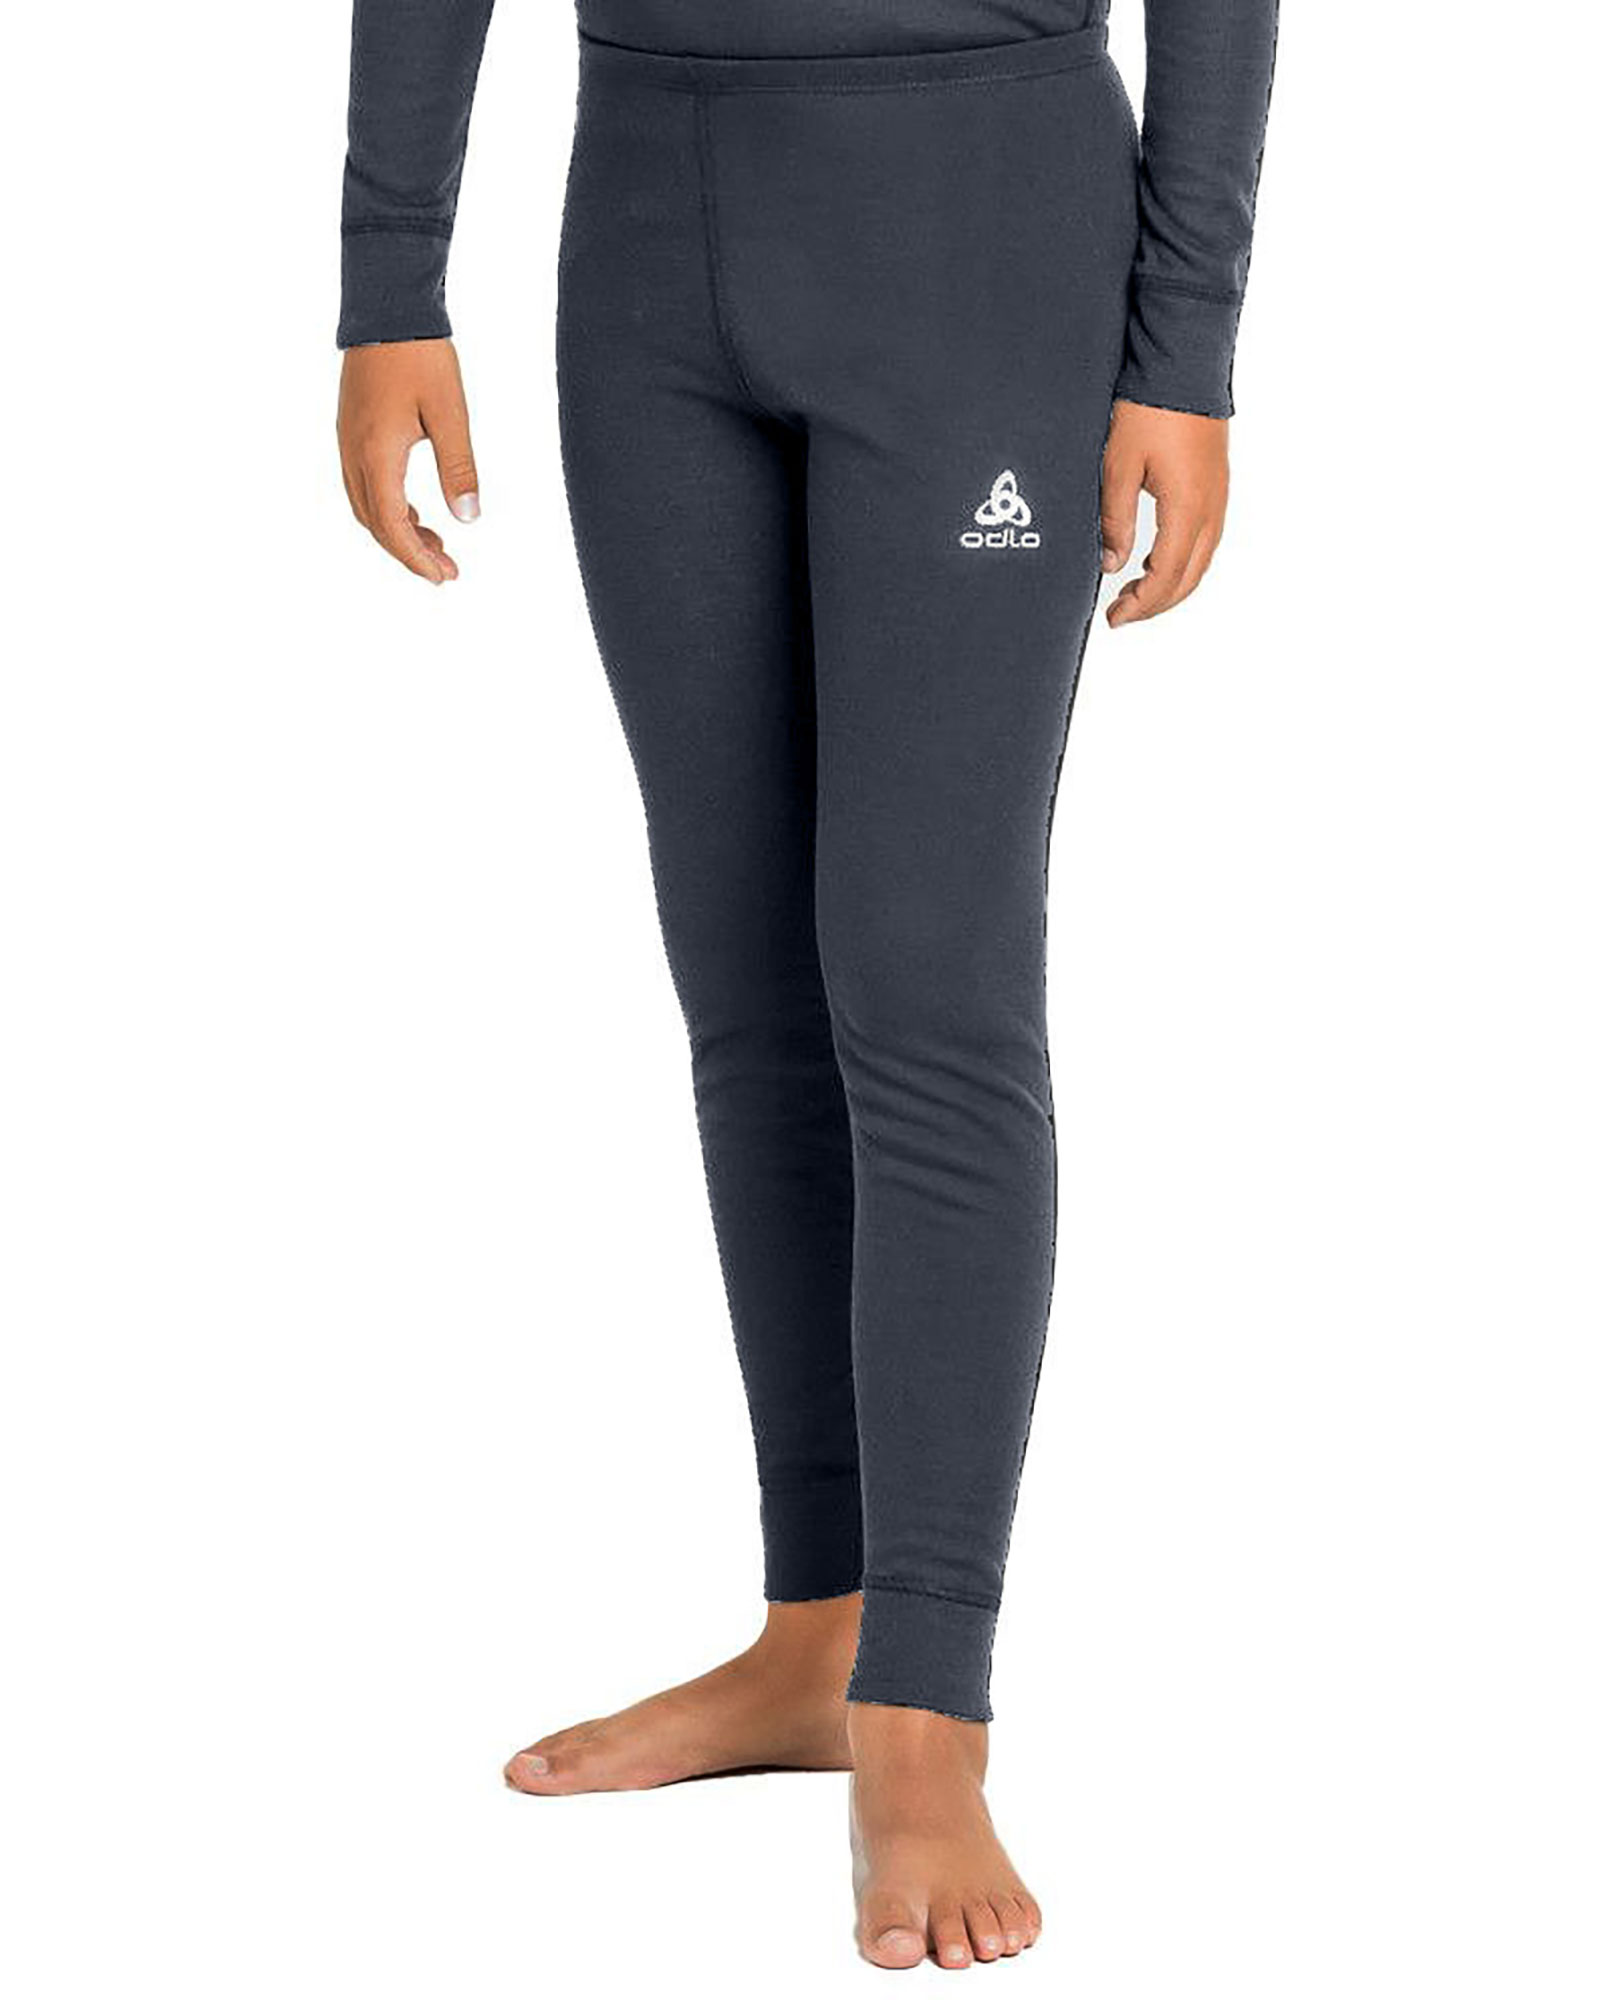 Odlo Active Warm Eco BL Kids’ Bottoms Long - India Ink 6 Years